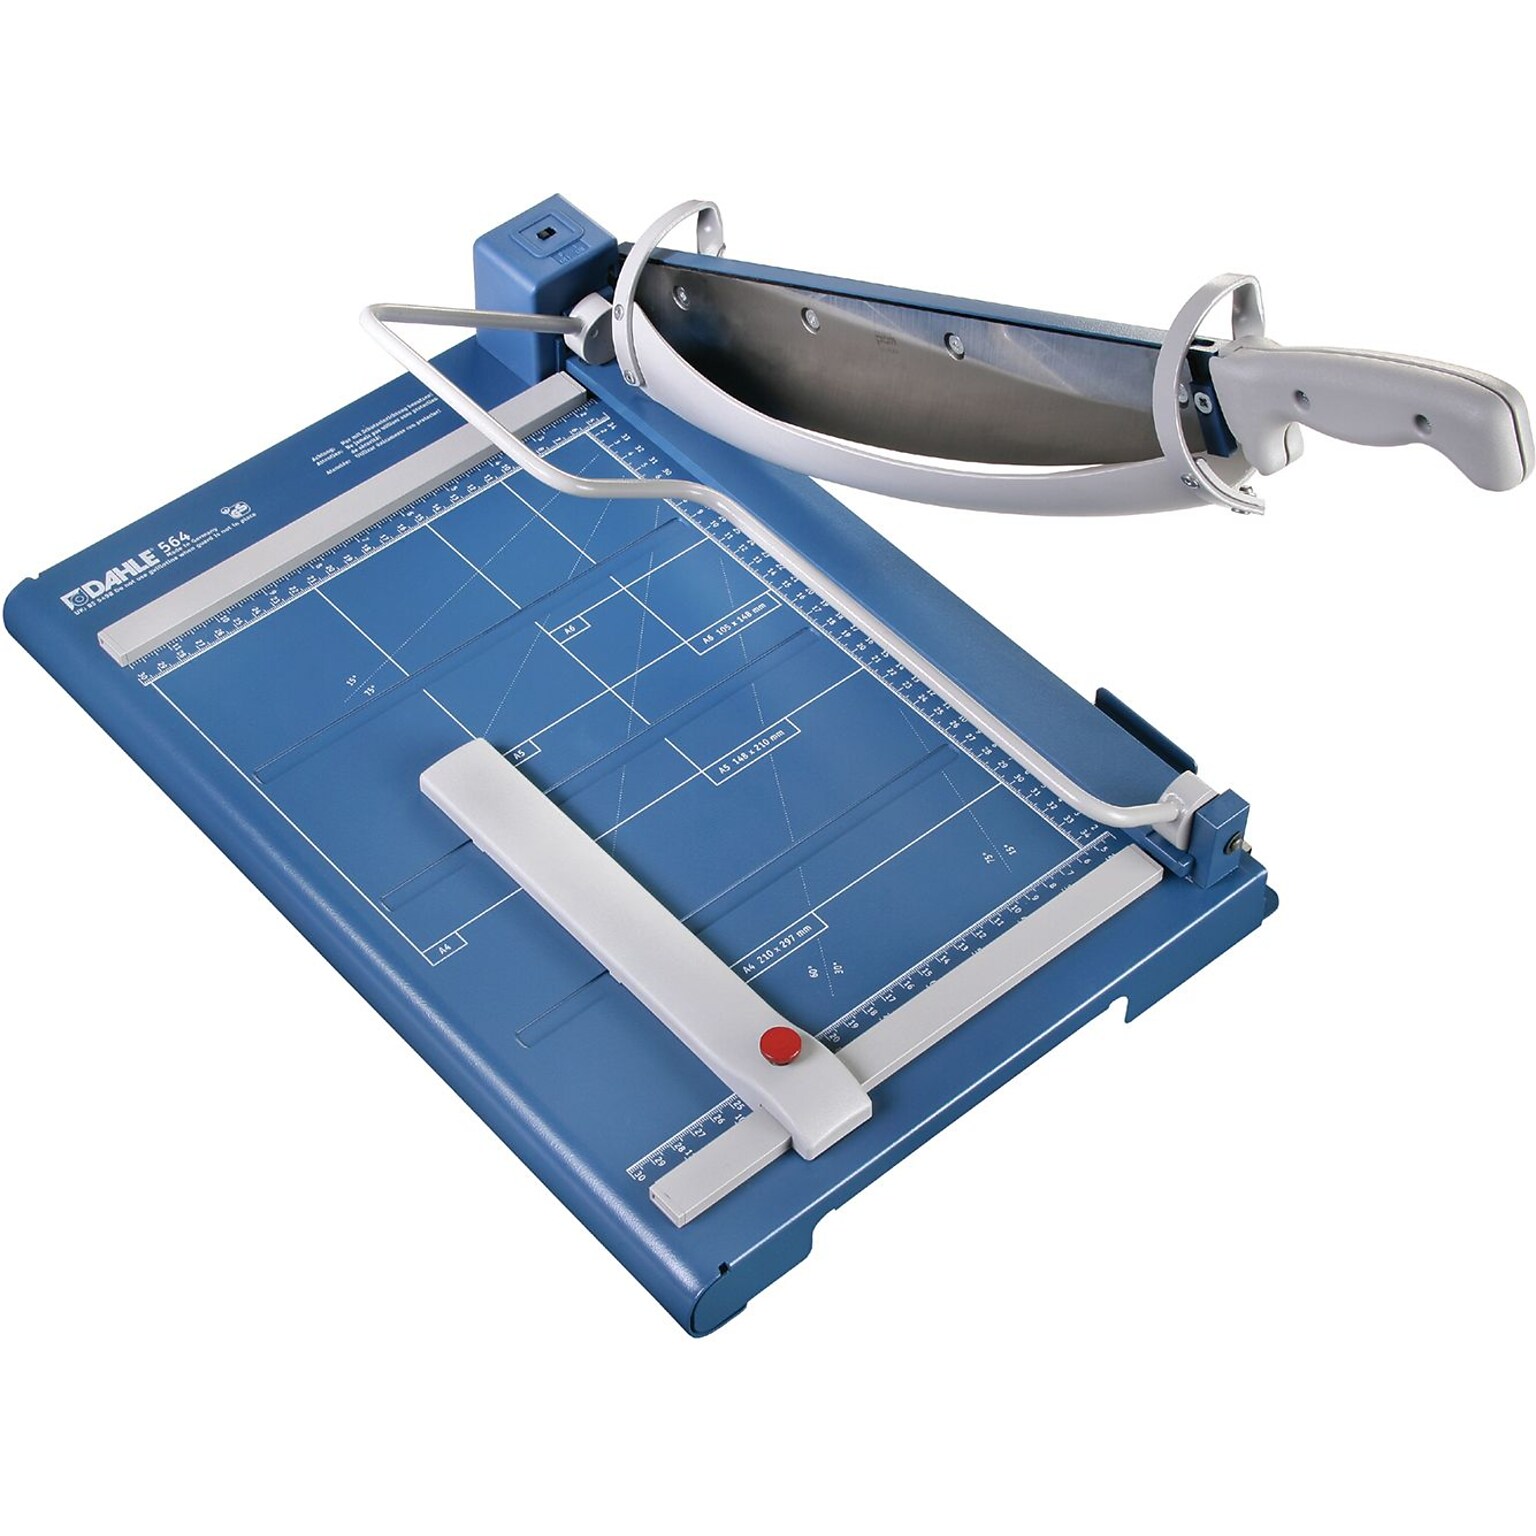 Dahle Premium Guillotine Paper Trimmer with Laser Guide , 14.2, Blue (564)